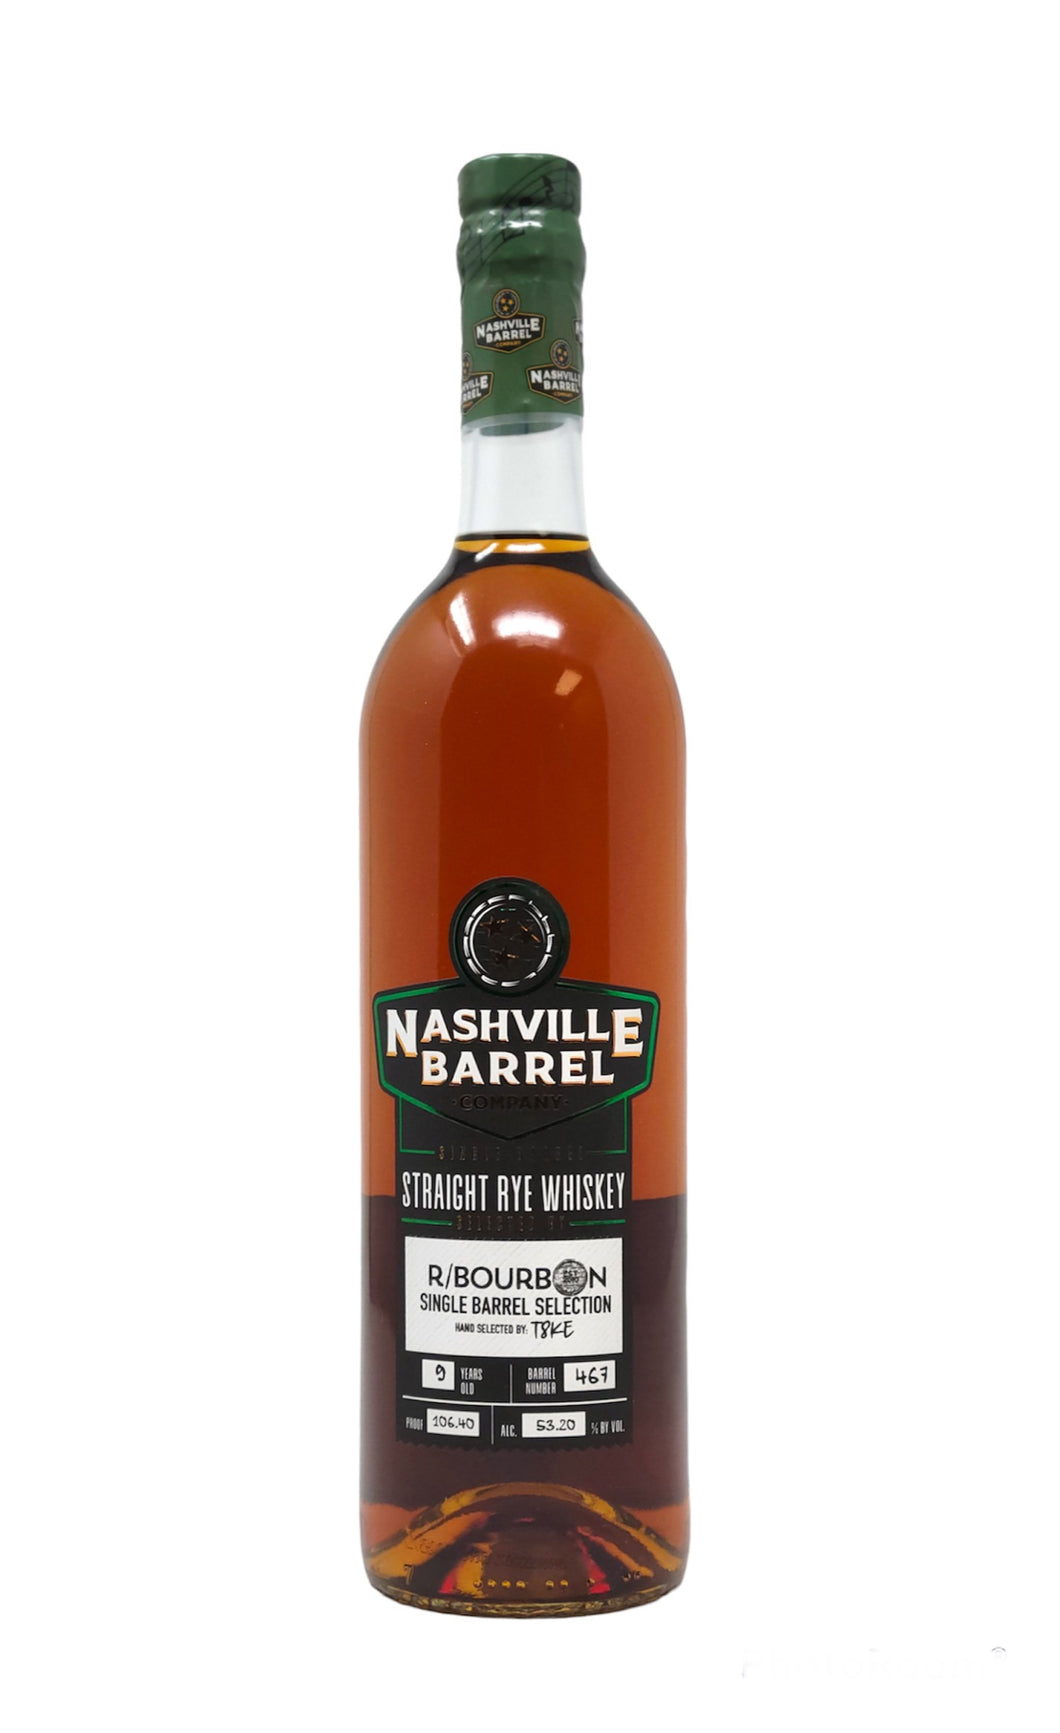 Nashville Barrel Co. #467 - 9 Year Rye 106.40 - Selected by r/bourbon